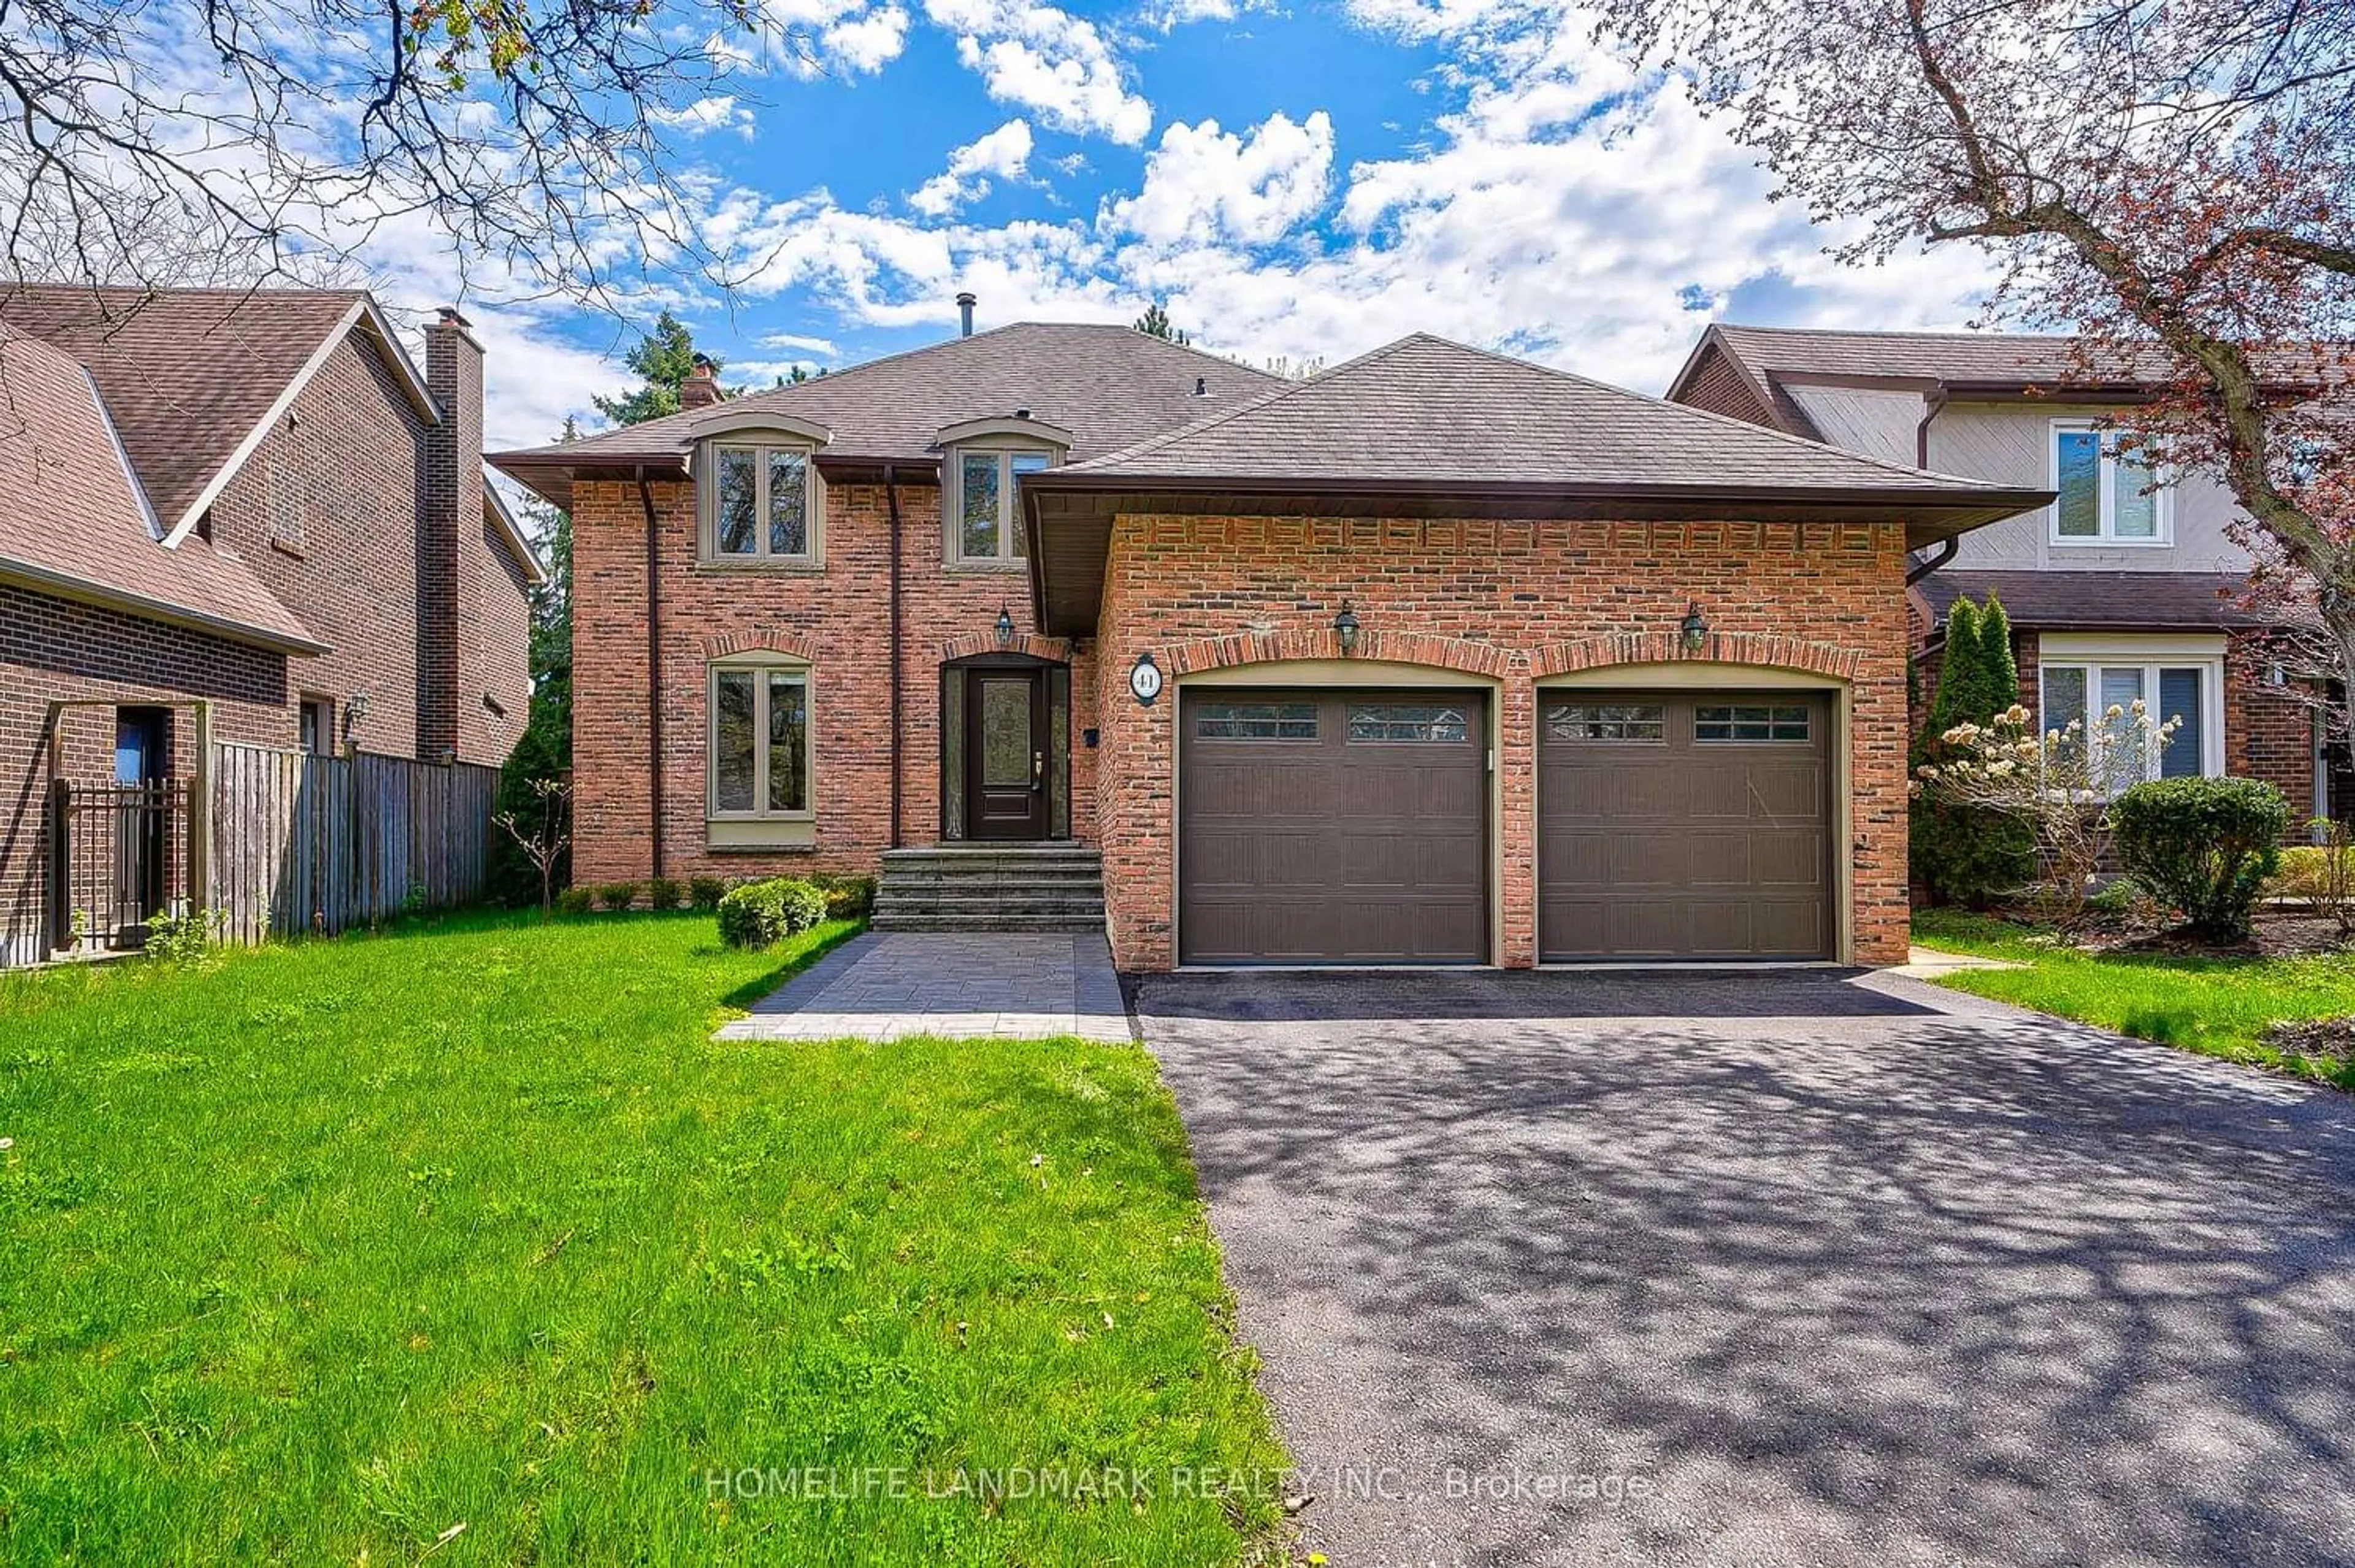 Home with brick exterior material for 41 Pennock Cres, Markham Ontario L3R 3M5